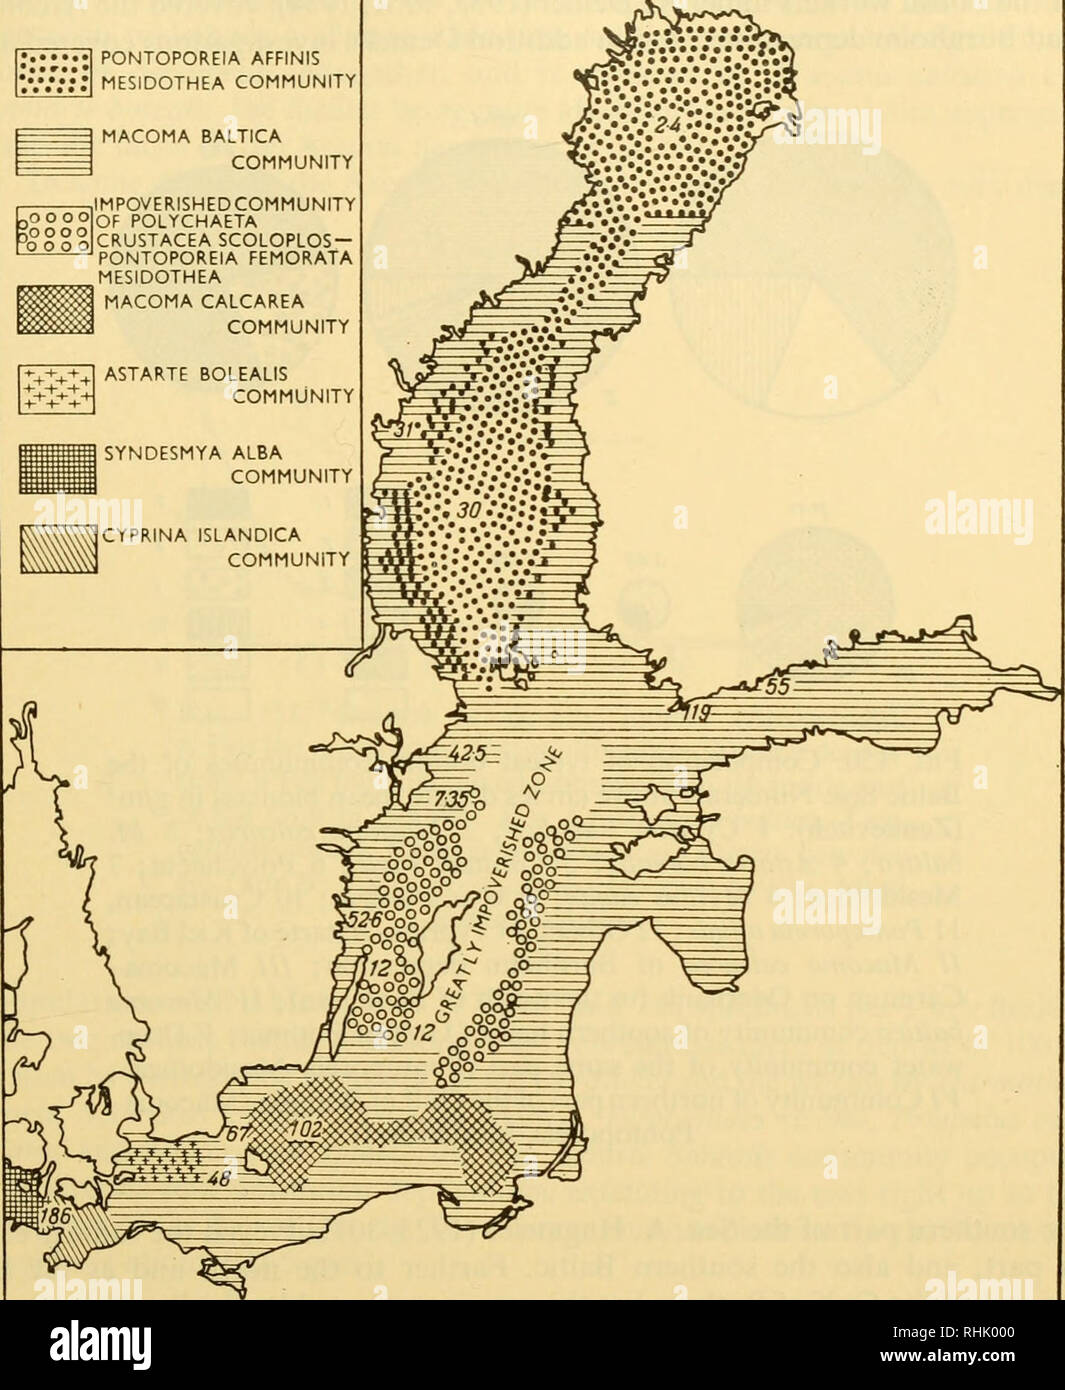 . Biology of the seas of the U.S.S.R. Marine biology -- Soviet Union; Hydrology -- Soviet Union. THE BALTIC SEA 315 In these areas west of the Darss ridge, a still considerable qualitative variety of benthos is observed; there are a large number of worms: Nephthys ciliata, N. coeca, Terebellides stromi, Pectinaria koreni, Scoloplos armiger and PONTOPOREIA AFFINIS ?::::: mesidothea community .0000 0000 0000 MACOMA BALTICA COMMUNITY IMPOVERISHEDCOMMUNITY OF POLYCHAETA CRUSTACEA SCOLOPLOS — PONTOPOREIA FEMORATA MESIDOTHEA MACOMA CALCAREA COMMUNITY. Fig. 149. Distribution of bottom communities in Stock Photo